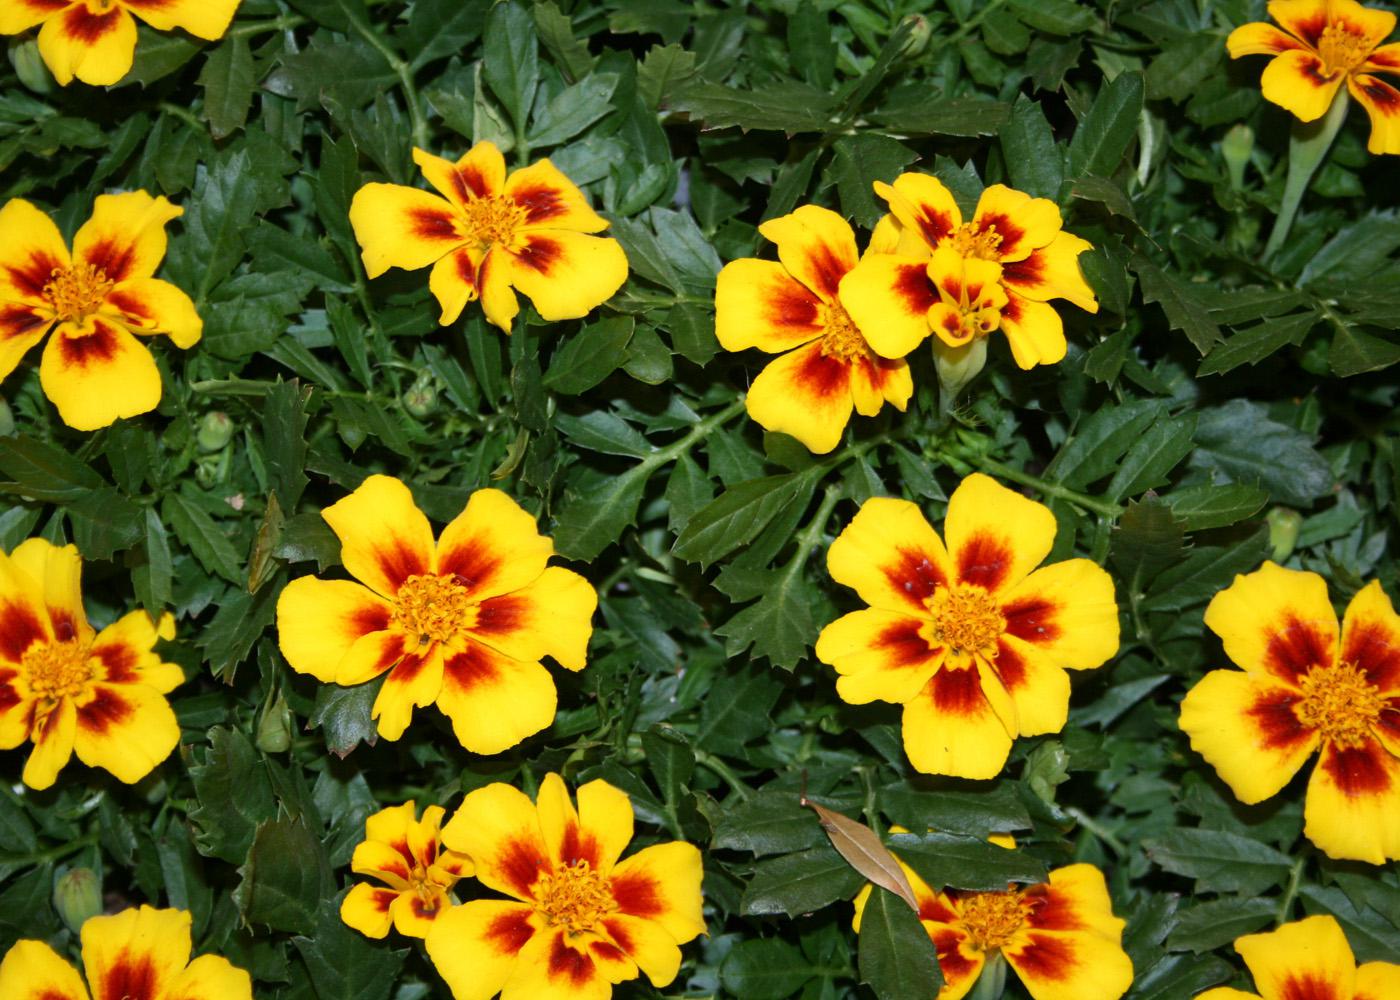 Disco Marietta is a single-flowered marigold that has yellow-orange petals featuring deep mahogany red splotches that look like paint brush strokes at the base of the flower.